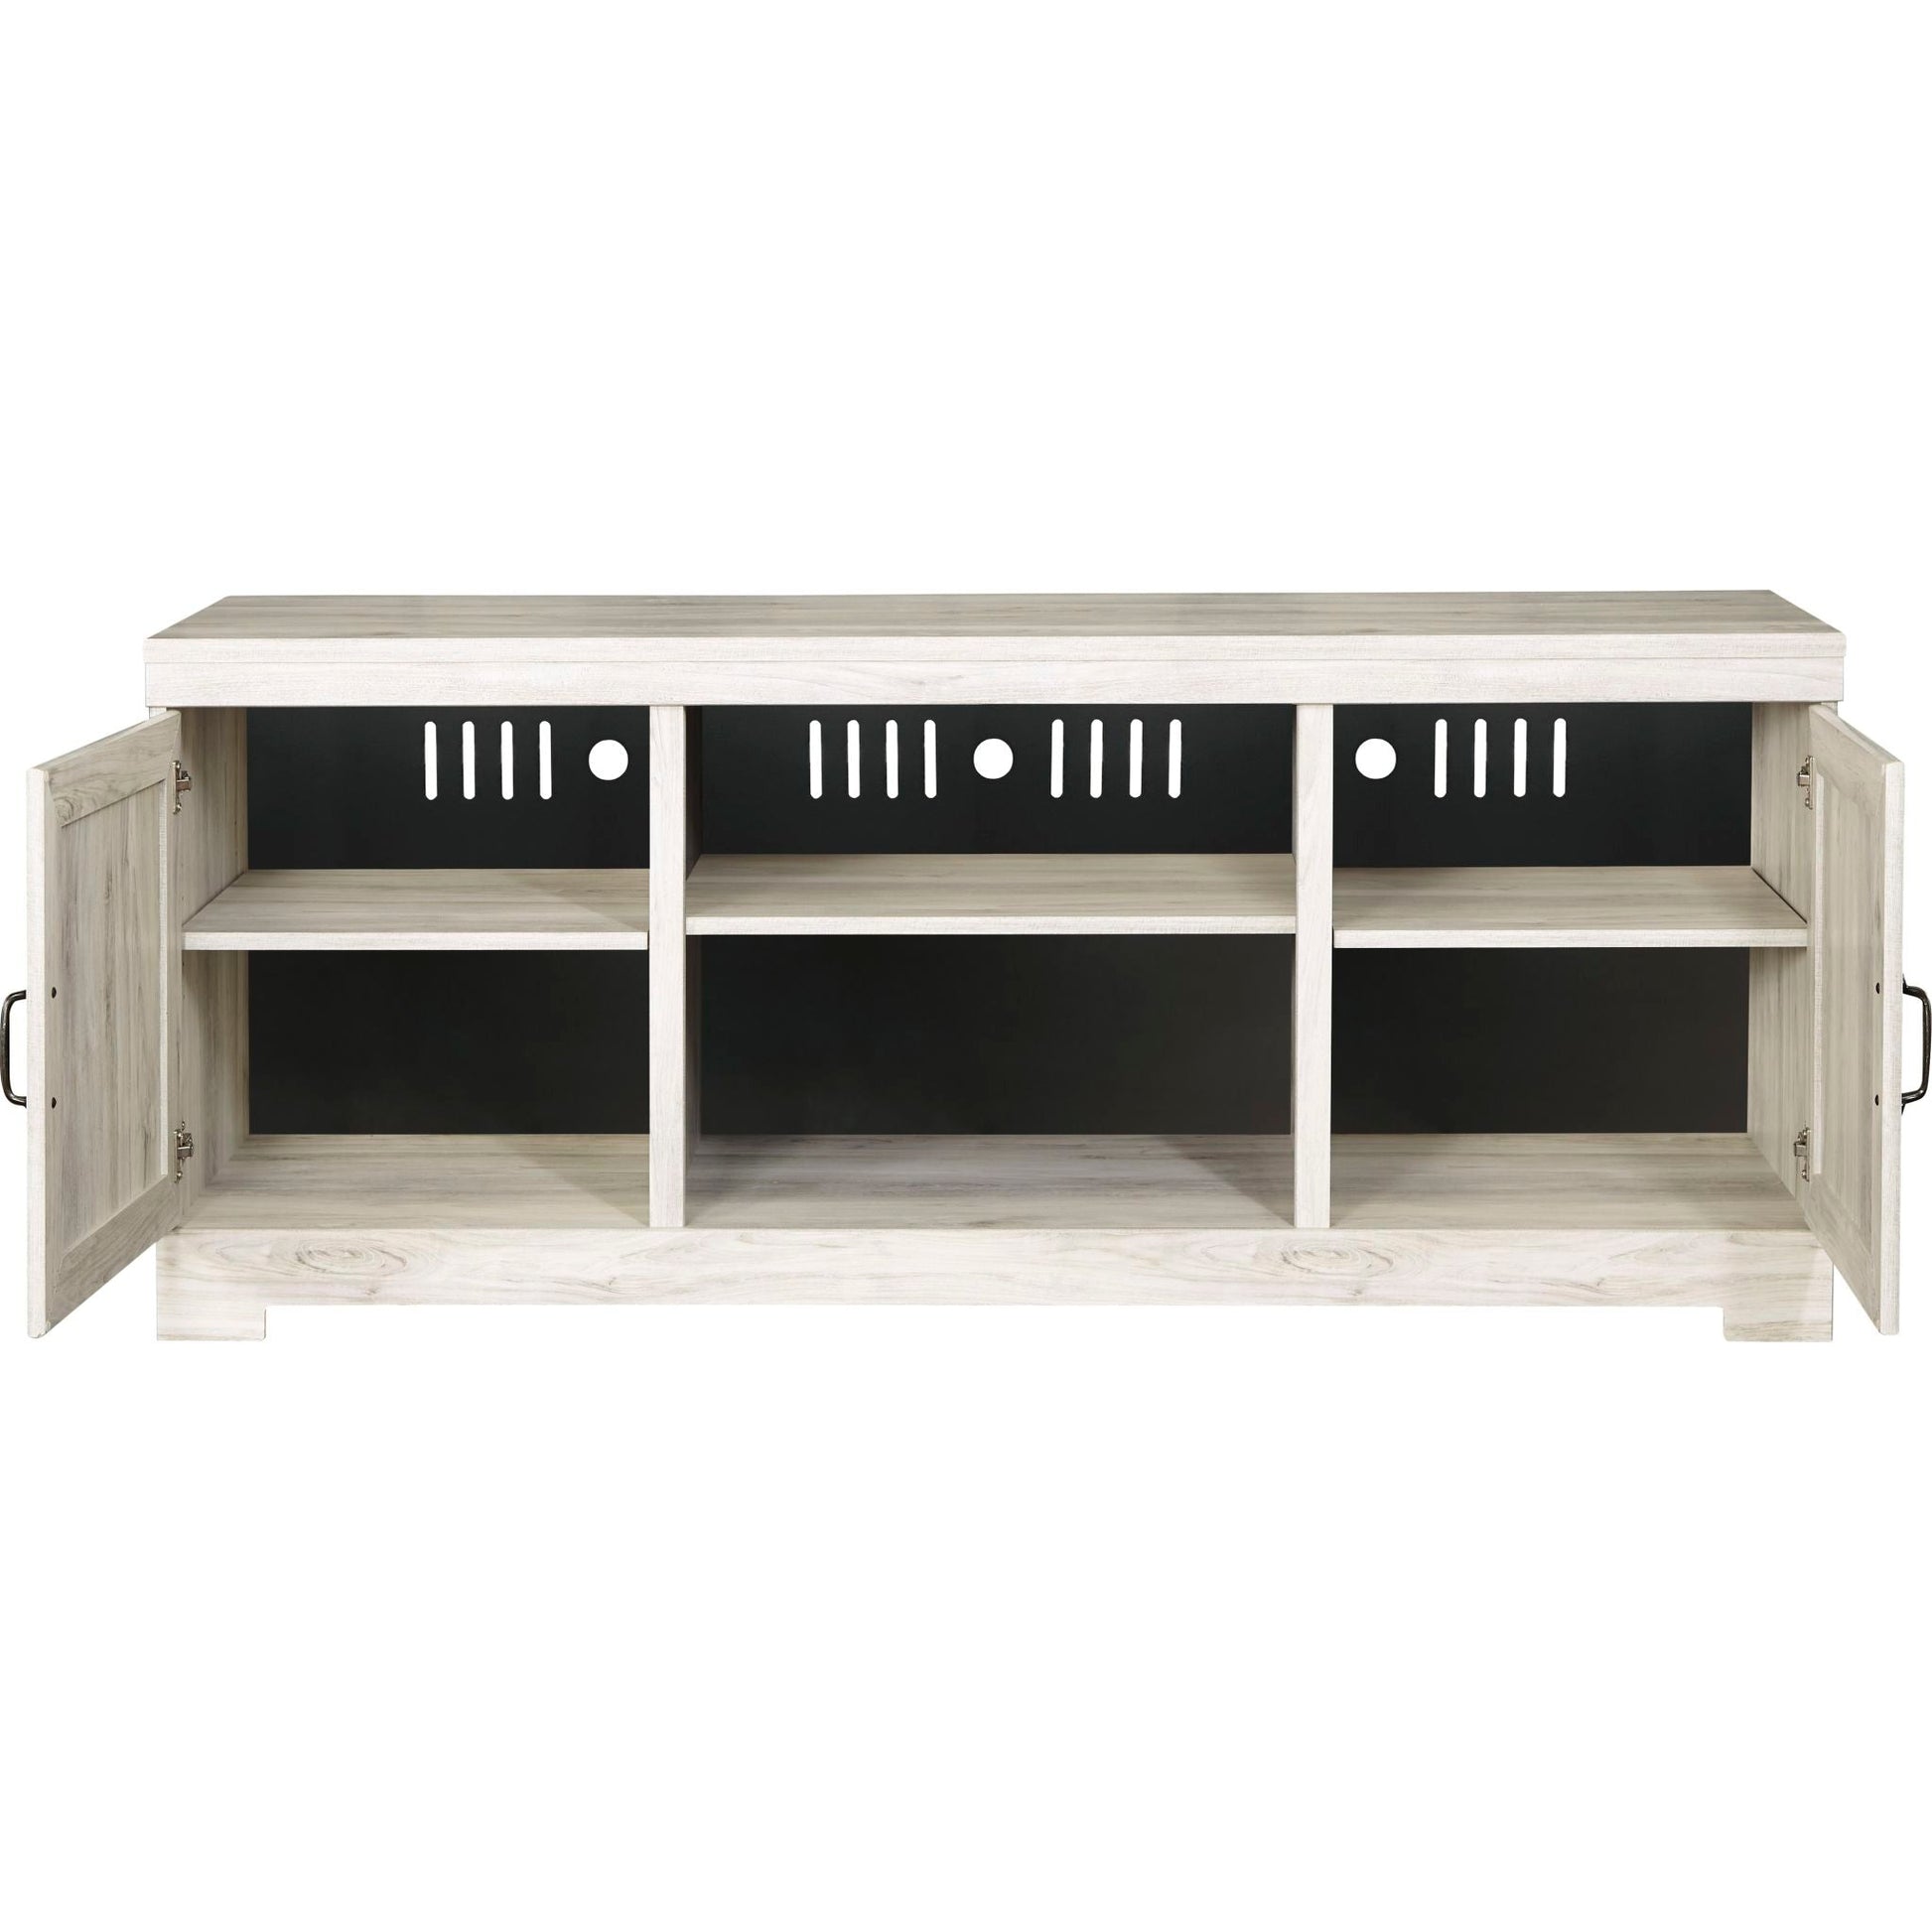 Bellaby TV Stand - Whitewash